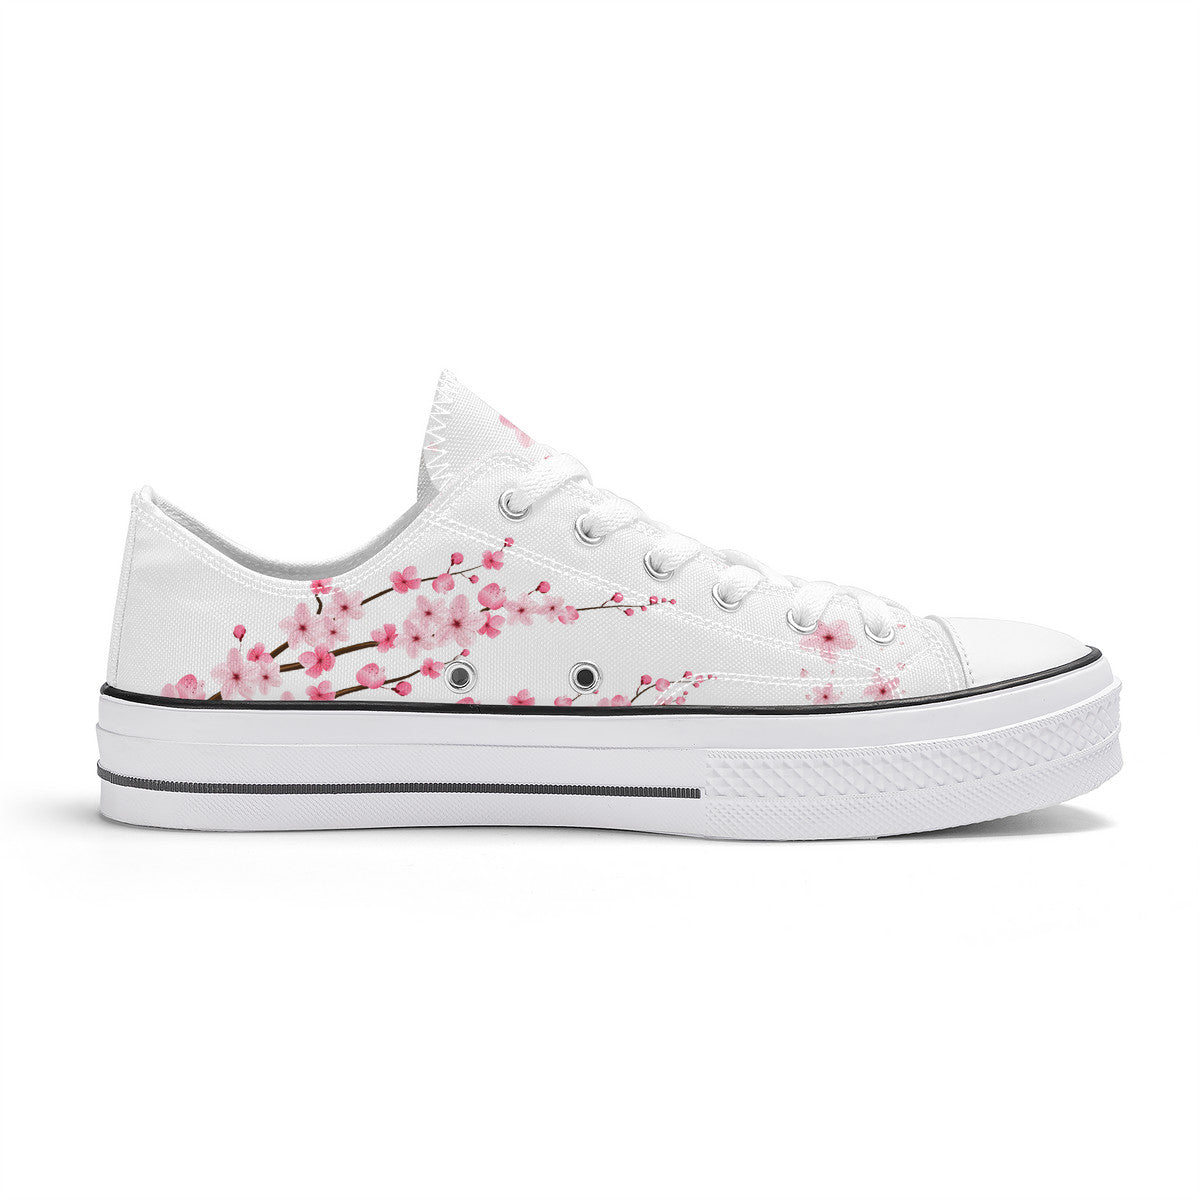 Classic Sakura Low Top Canvas Converse Style Shoes